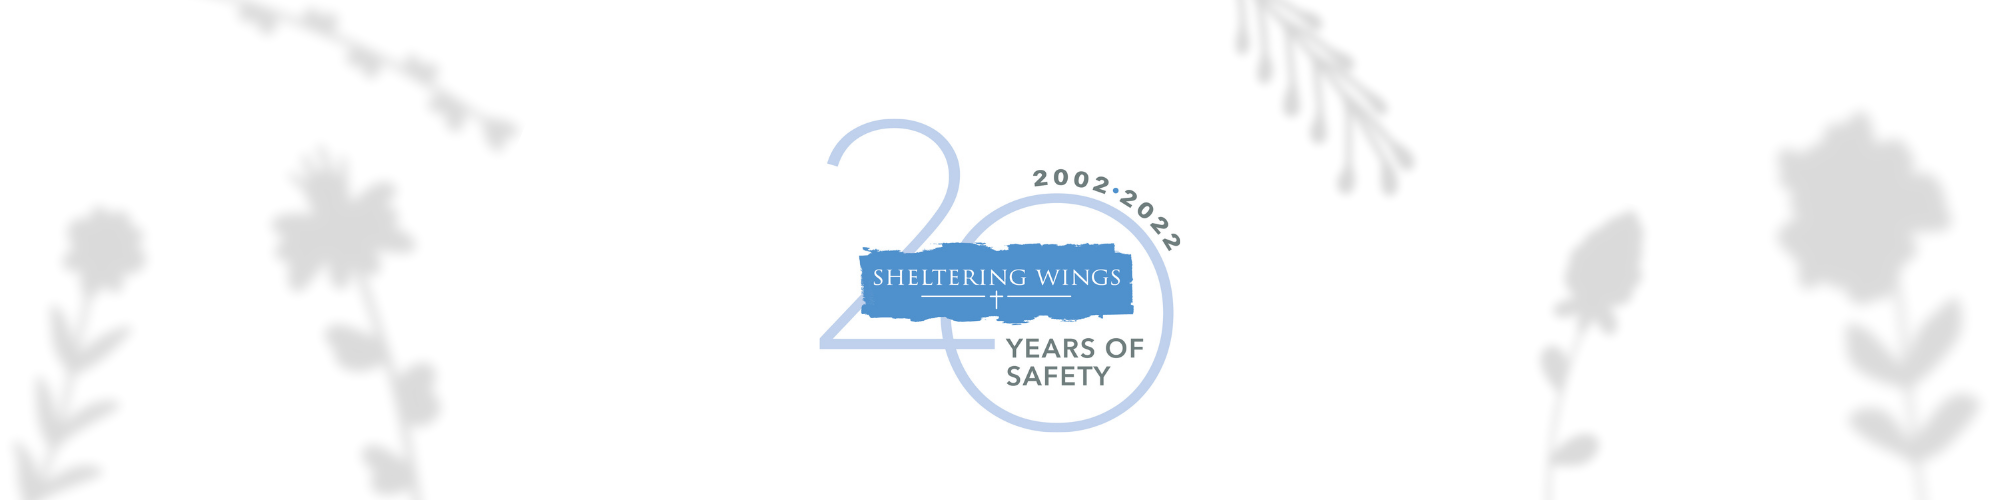 20 Years of Safety